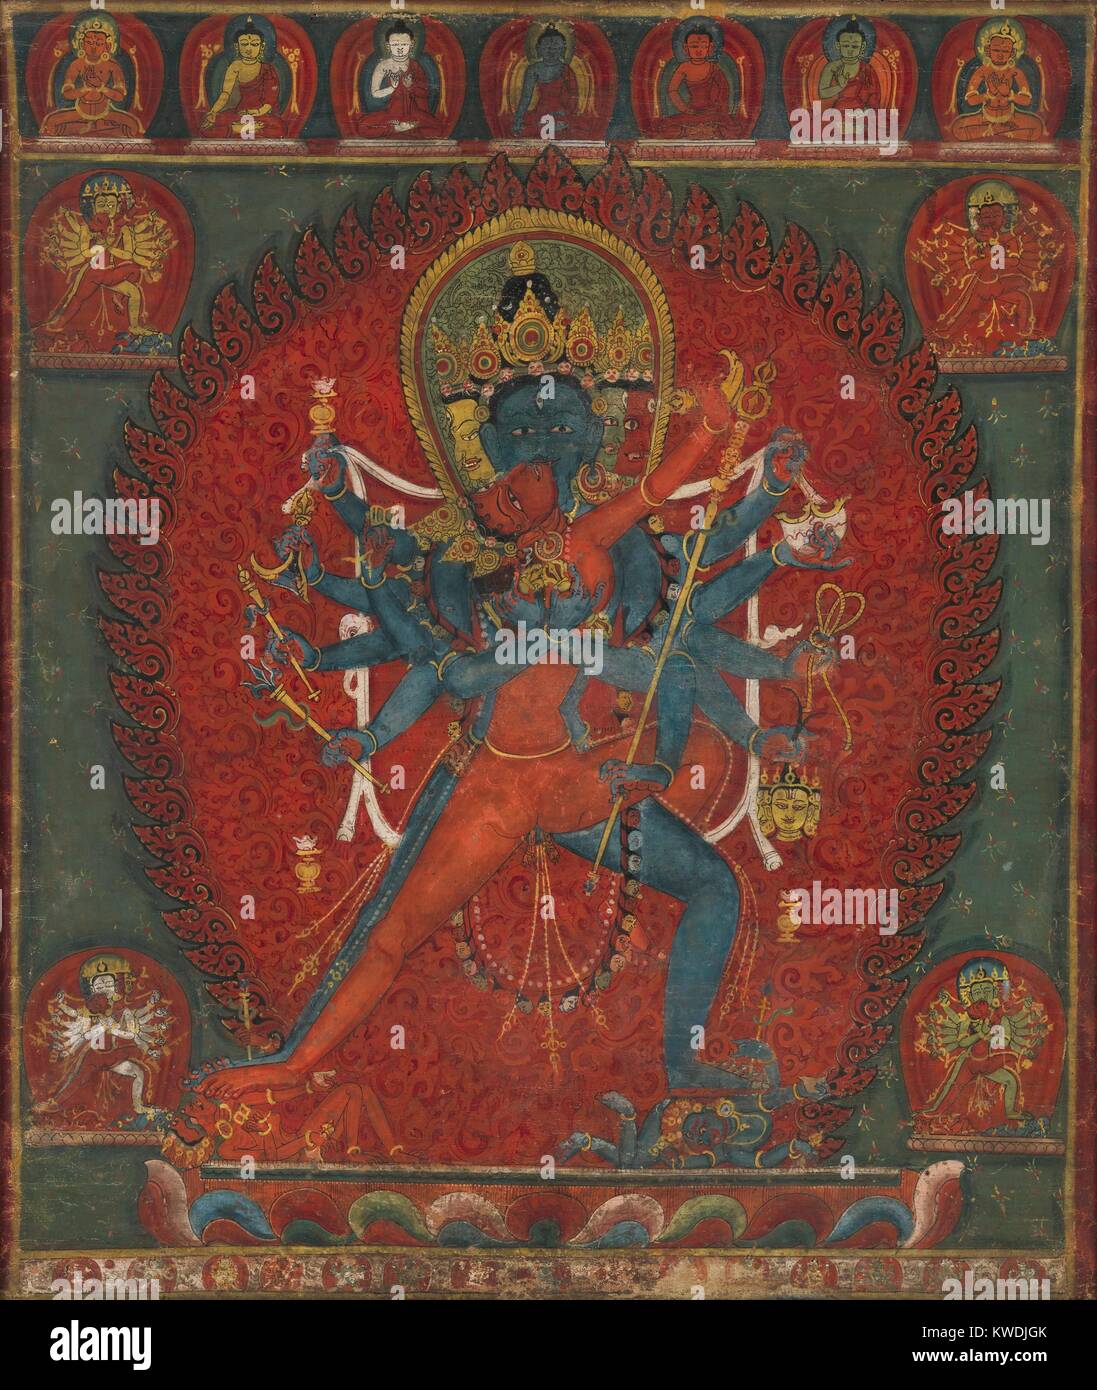 CHAKRASAMVARA AND VAJRAVARAHI, Buddhist, Nepal, 1570-1600, painting, distemper on cotton. Buddhist deity, Chakrasamvara, embracing his consort, Vajravarahi. Chakrasamvara, has a blue figure, four faces and twelve hands. The main face is blue, left face red, back face yellow, and right face white (BSLOC 2017 16 15) Stock Photo